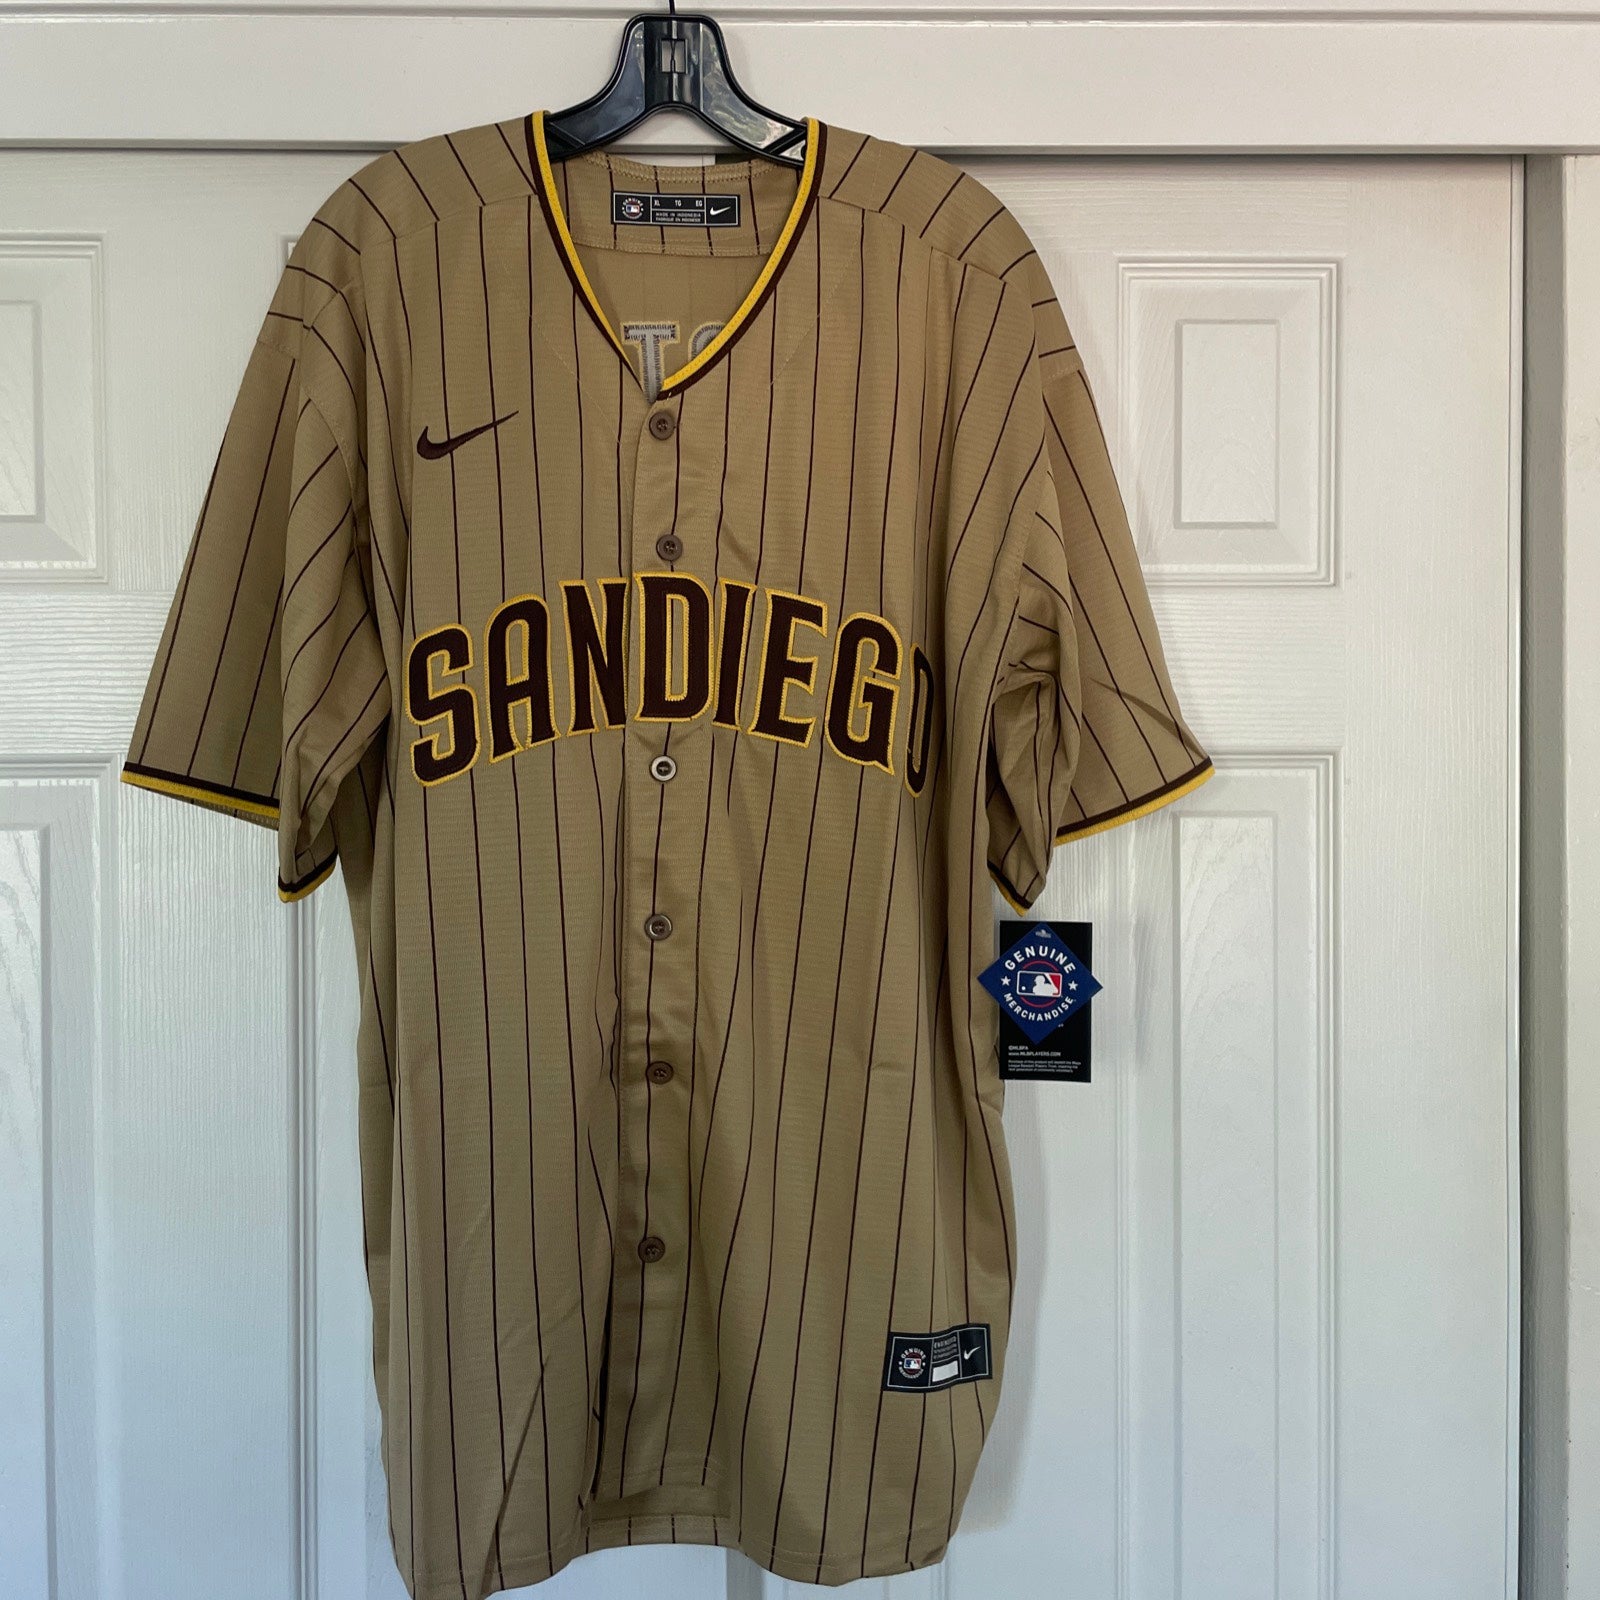 Padres uniforms: San Diego returns to brown jerseys in 2020